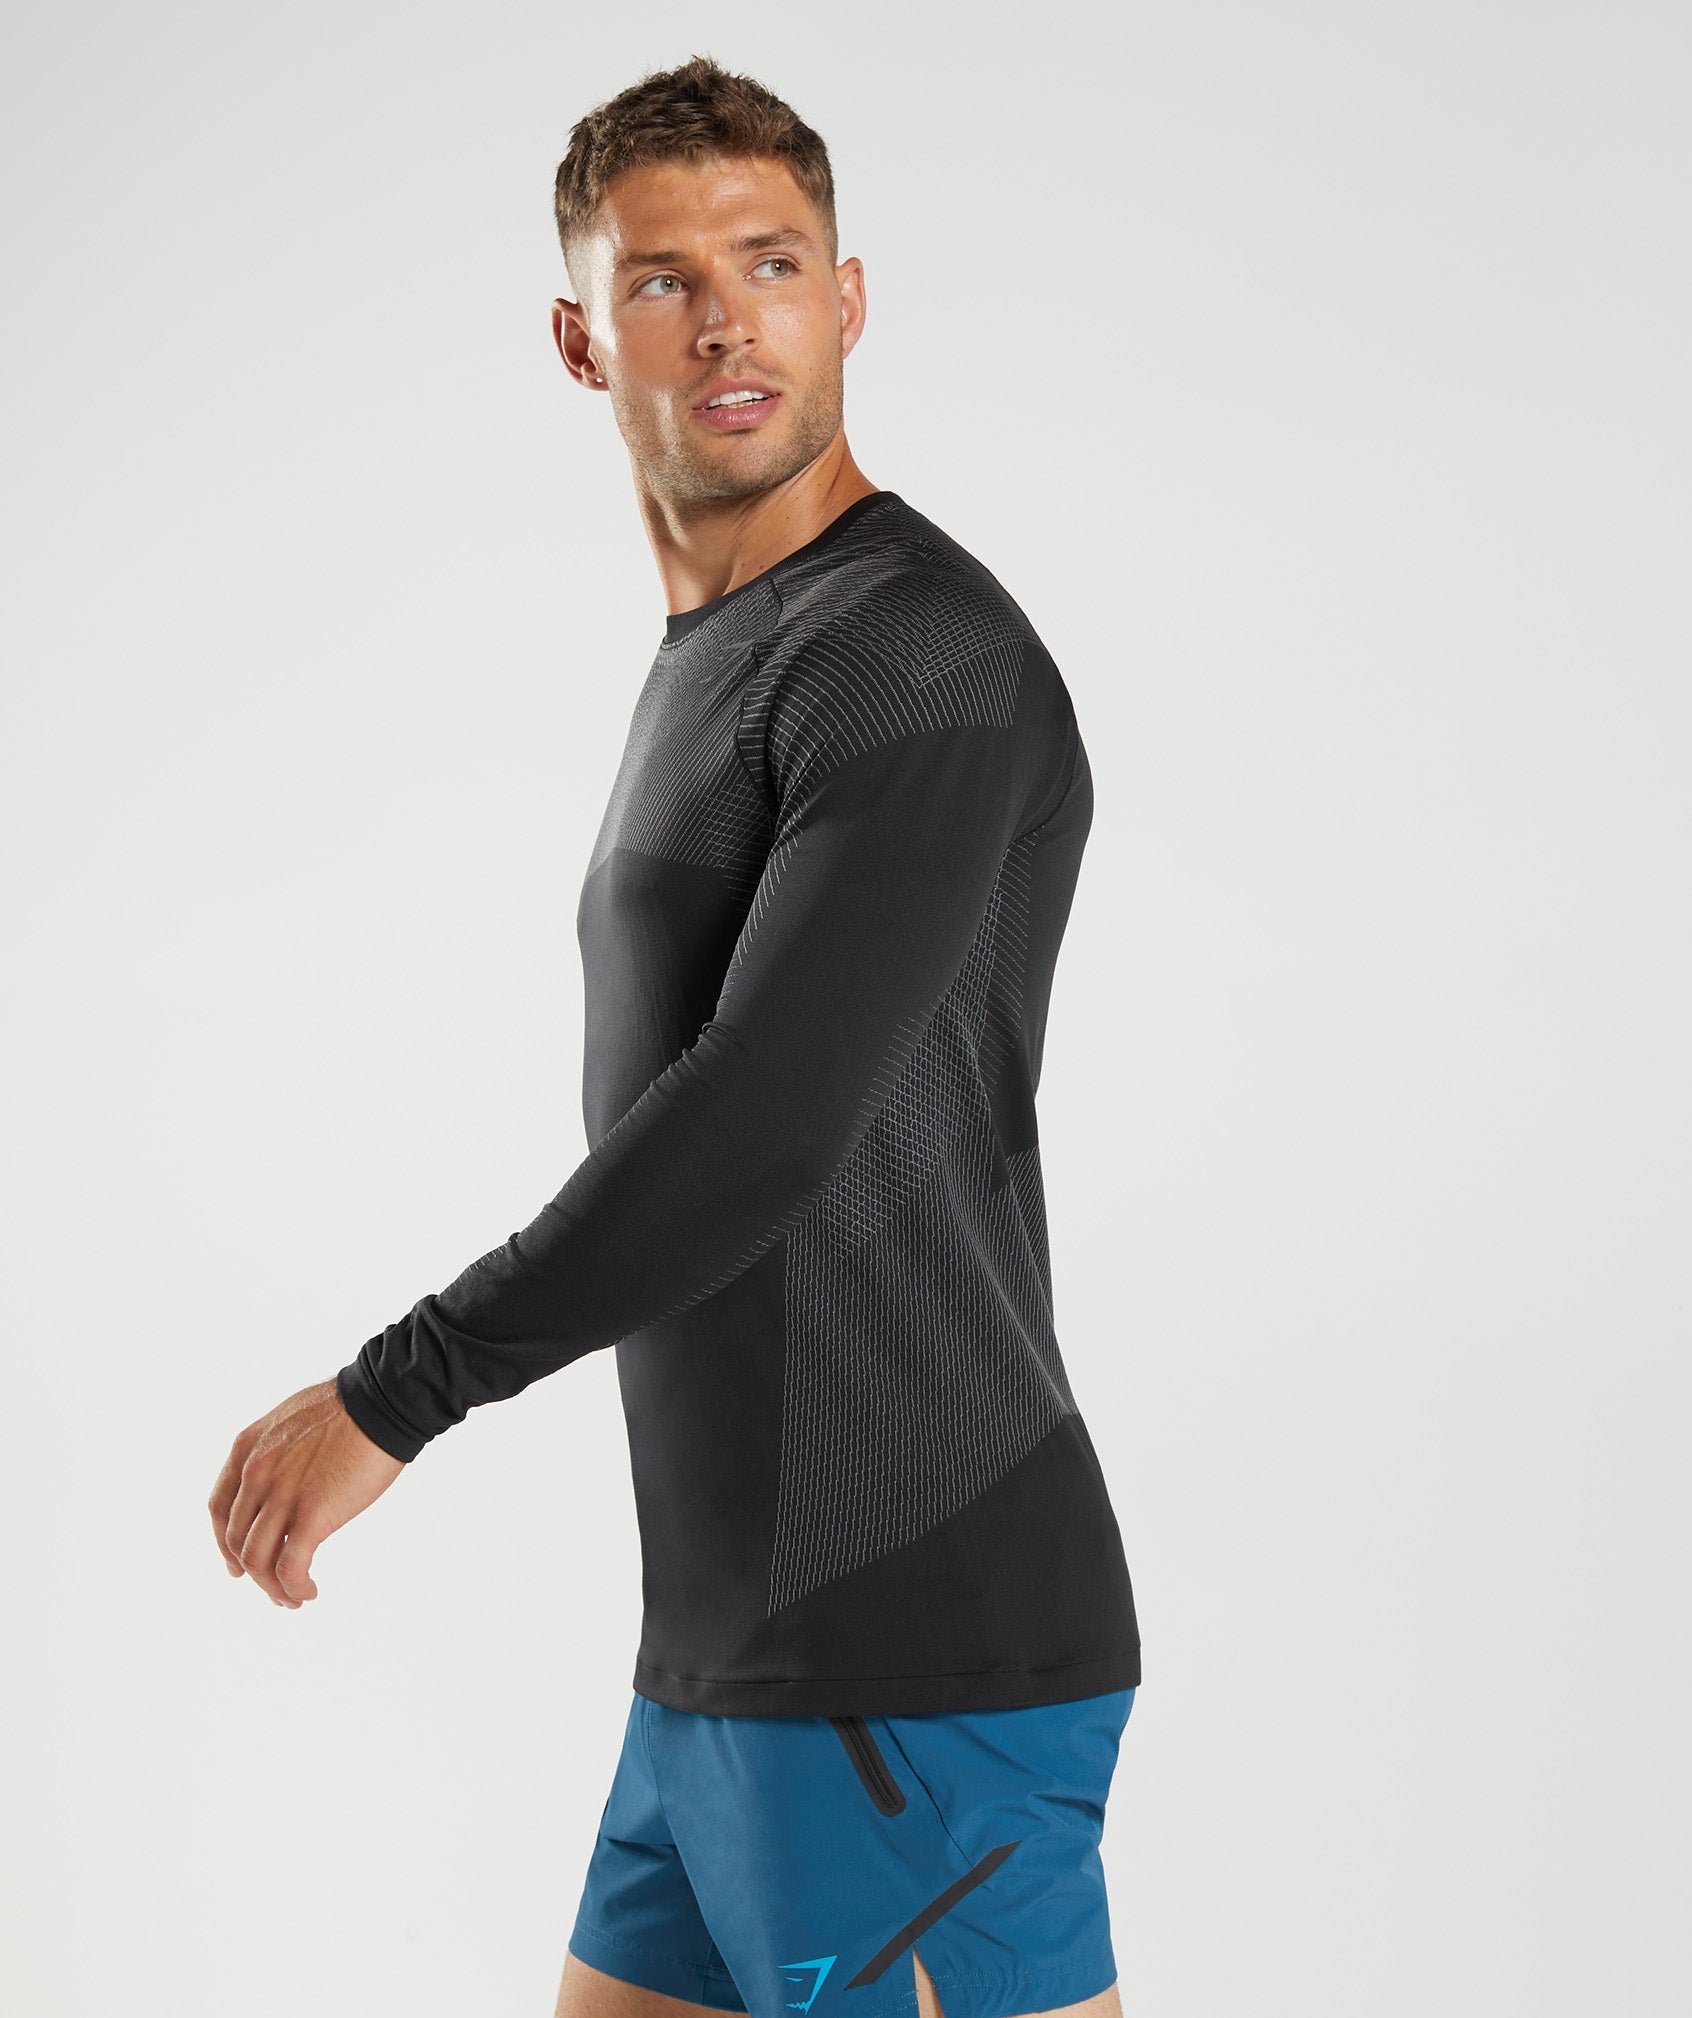 Apex Seamless Long Sleeve T-Shirt in Black/Silhouette Grey - view 3